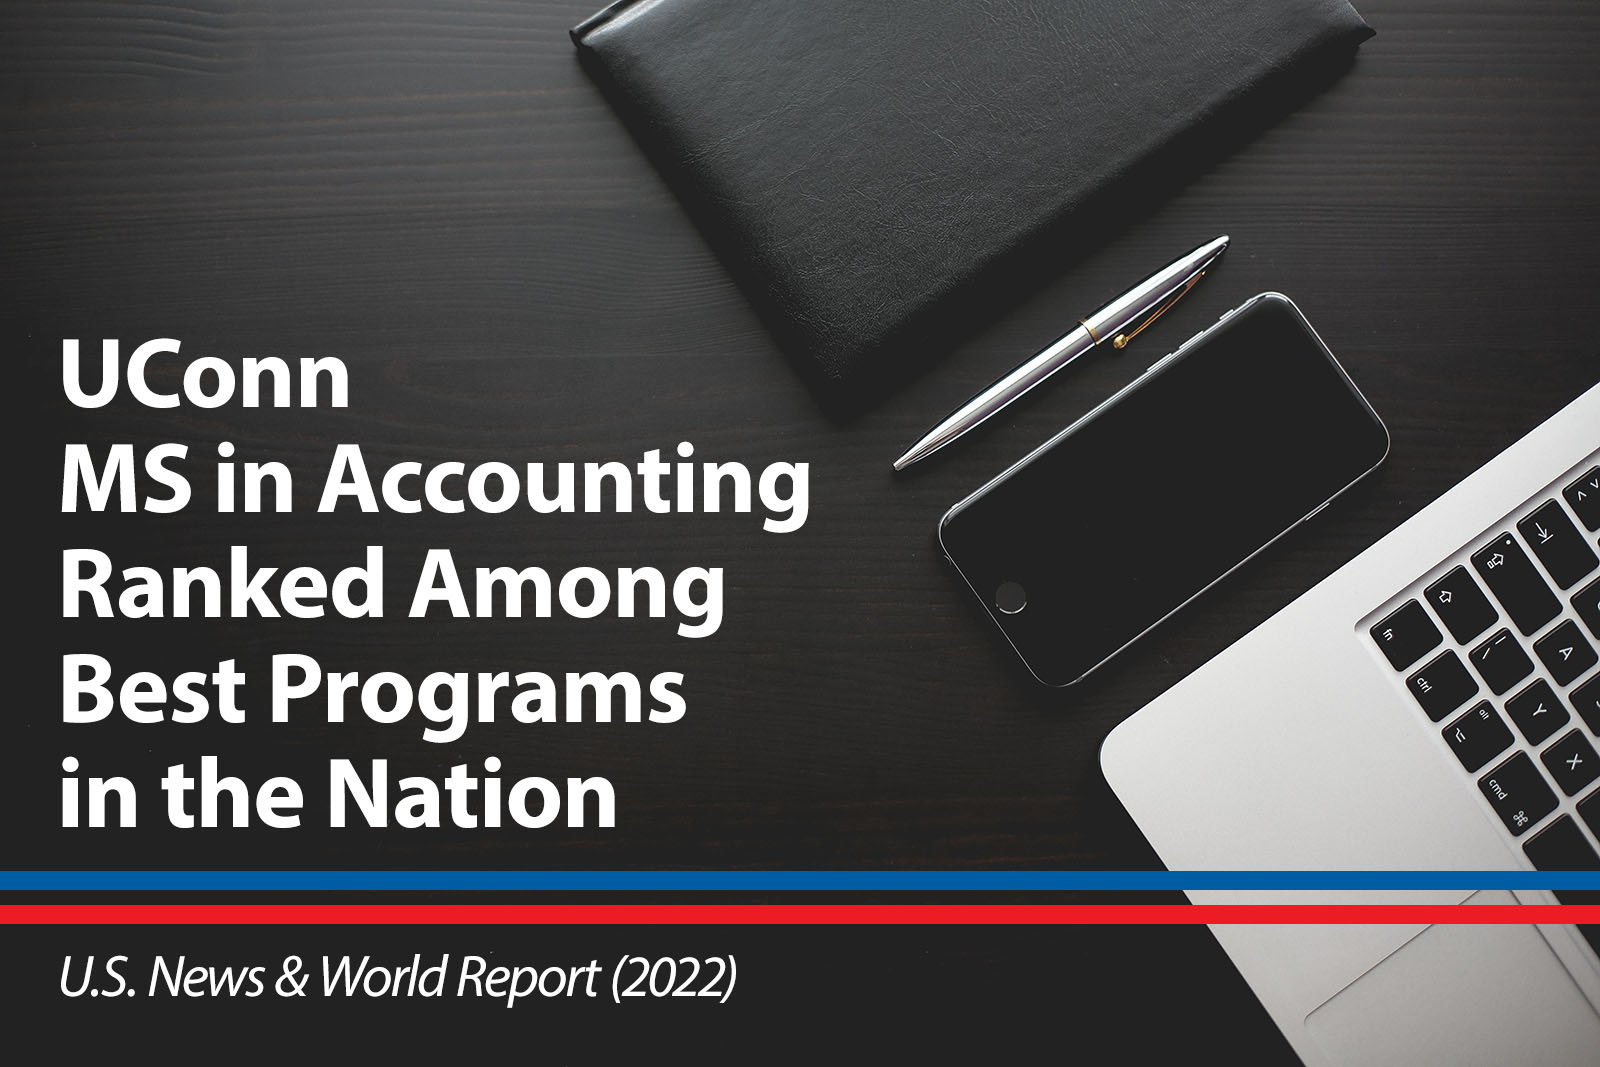 UConn Master of Science in Accounting ranked among the best programs in the nation by U.S. News and World Report 2022